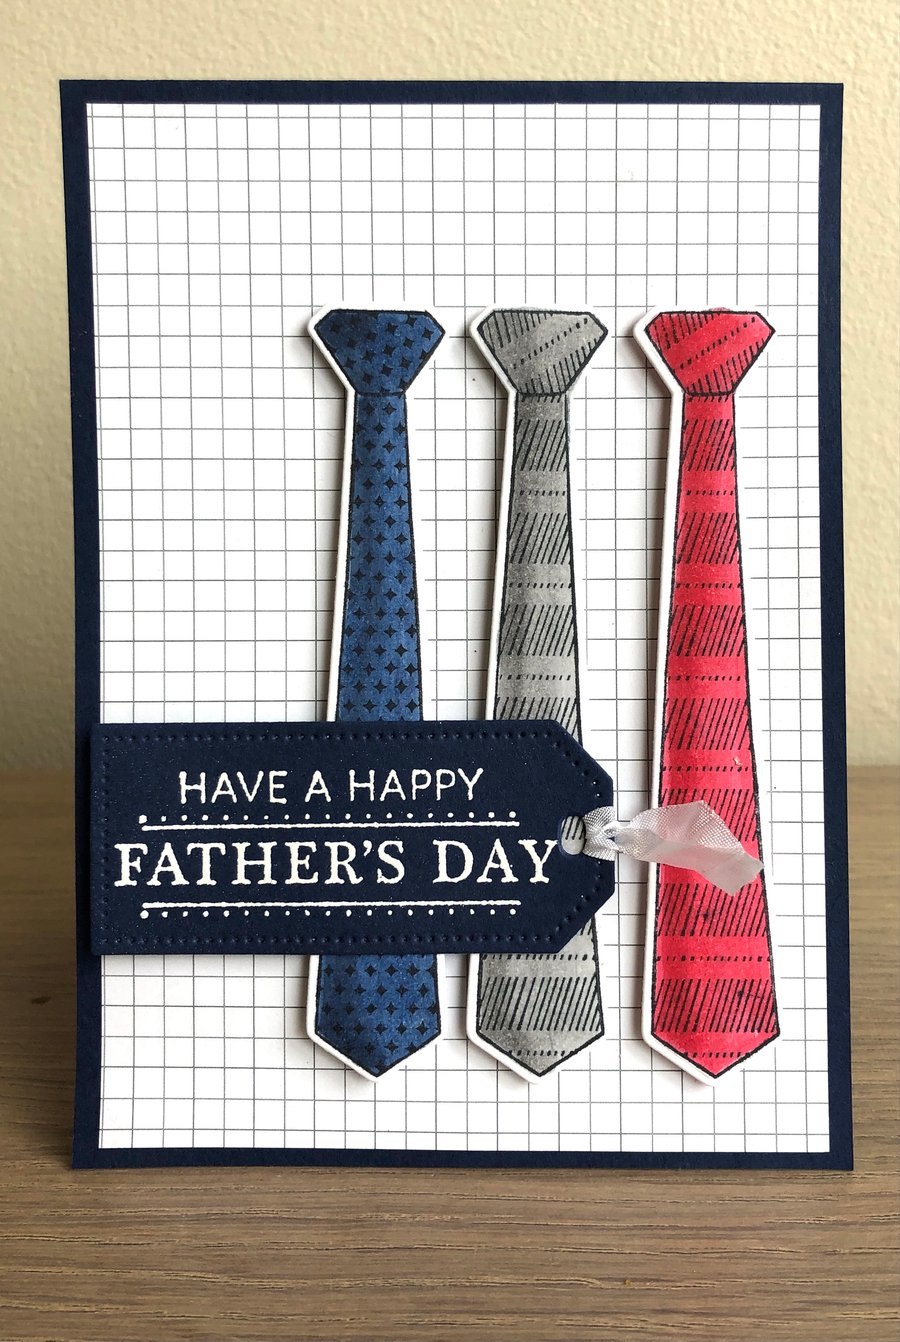 Handmade Happy Father's Day card - Ties! - hand stamped